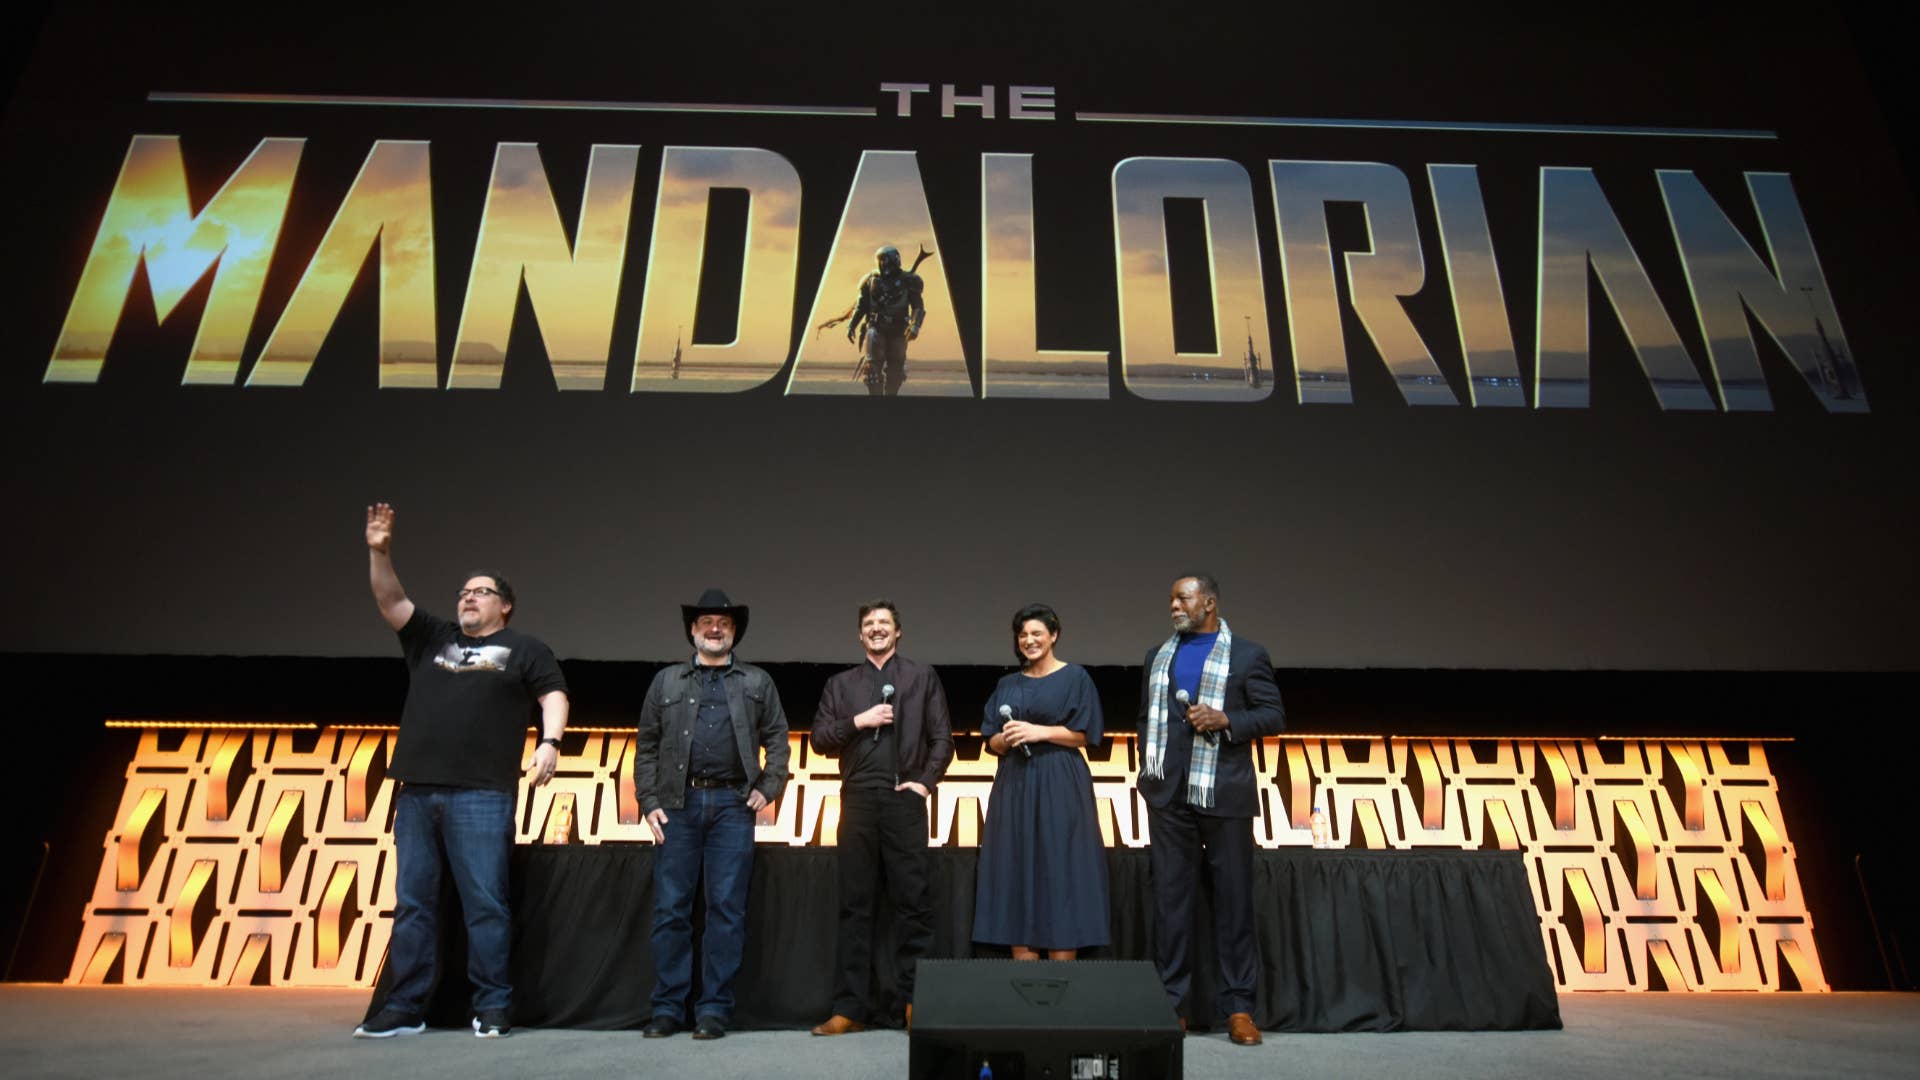 Cast and crew onstage during "The Mandalorian" panel.